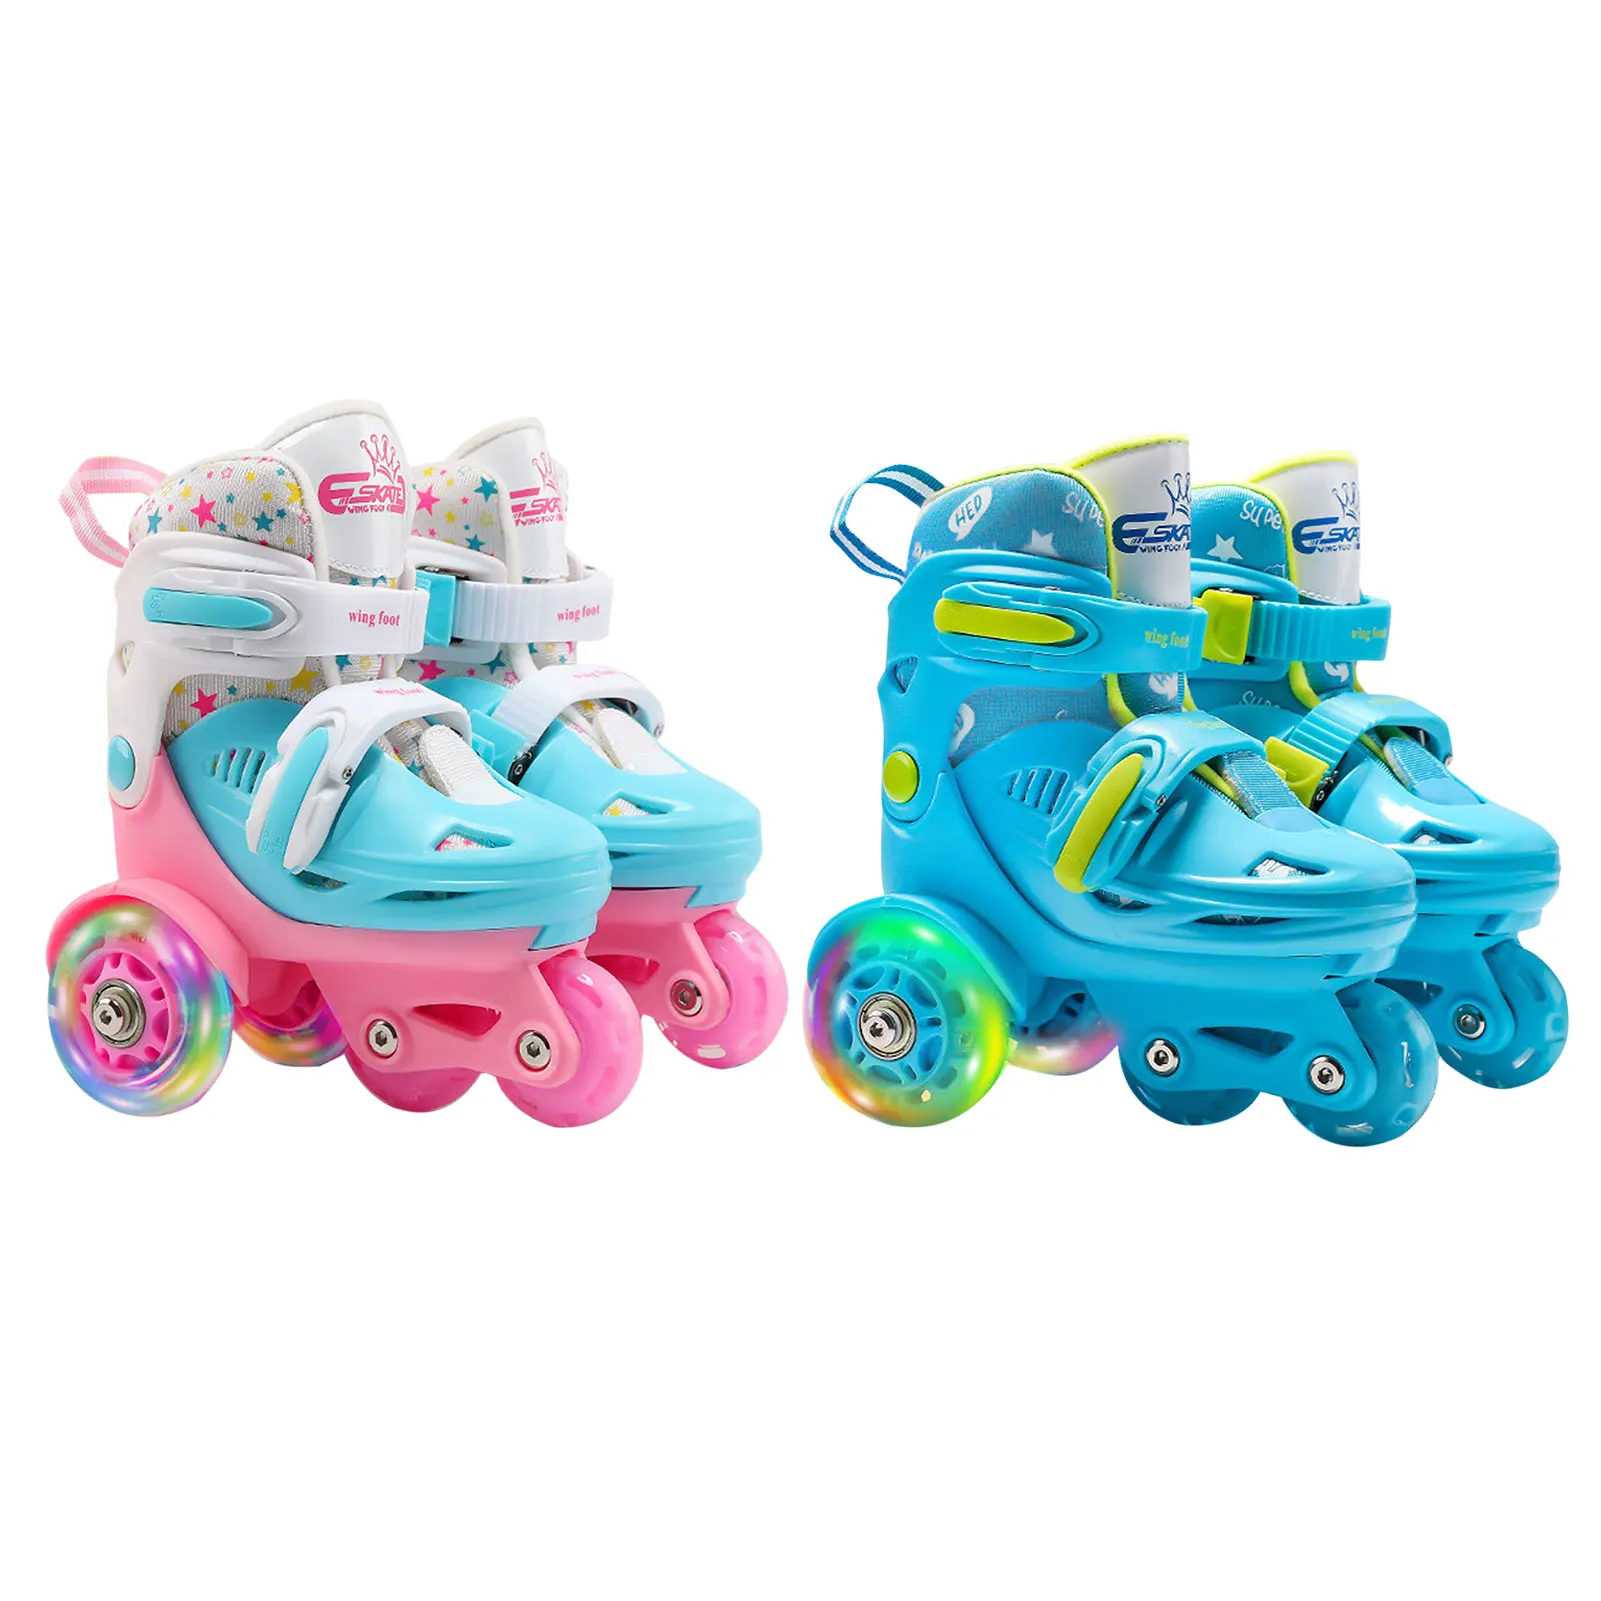 Comfortable Soft Safity Breathable Durable Adjustable High Quality Roller Skates Elastic PU Inline Rollers For Kids 2-8 1